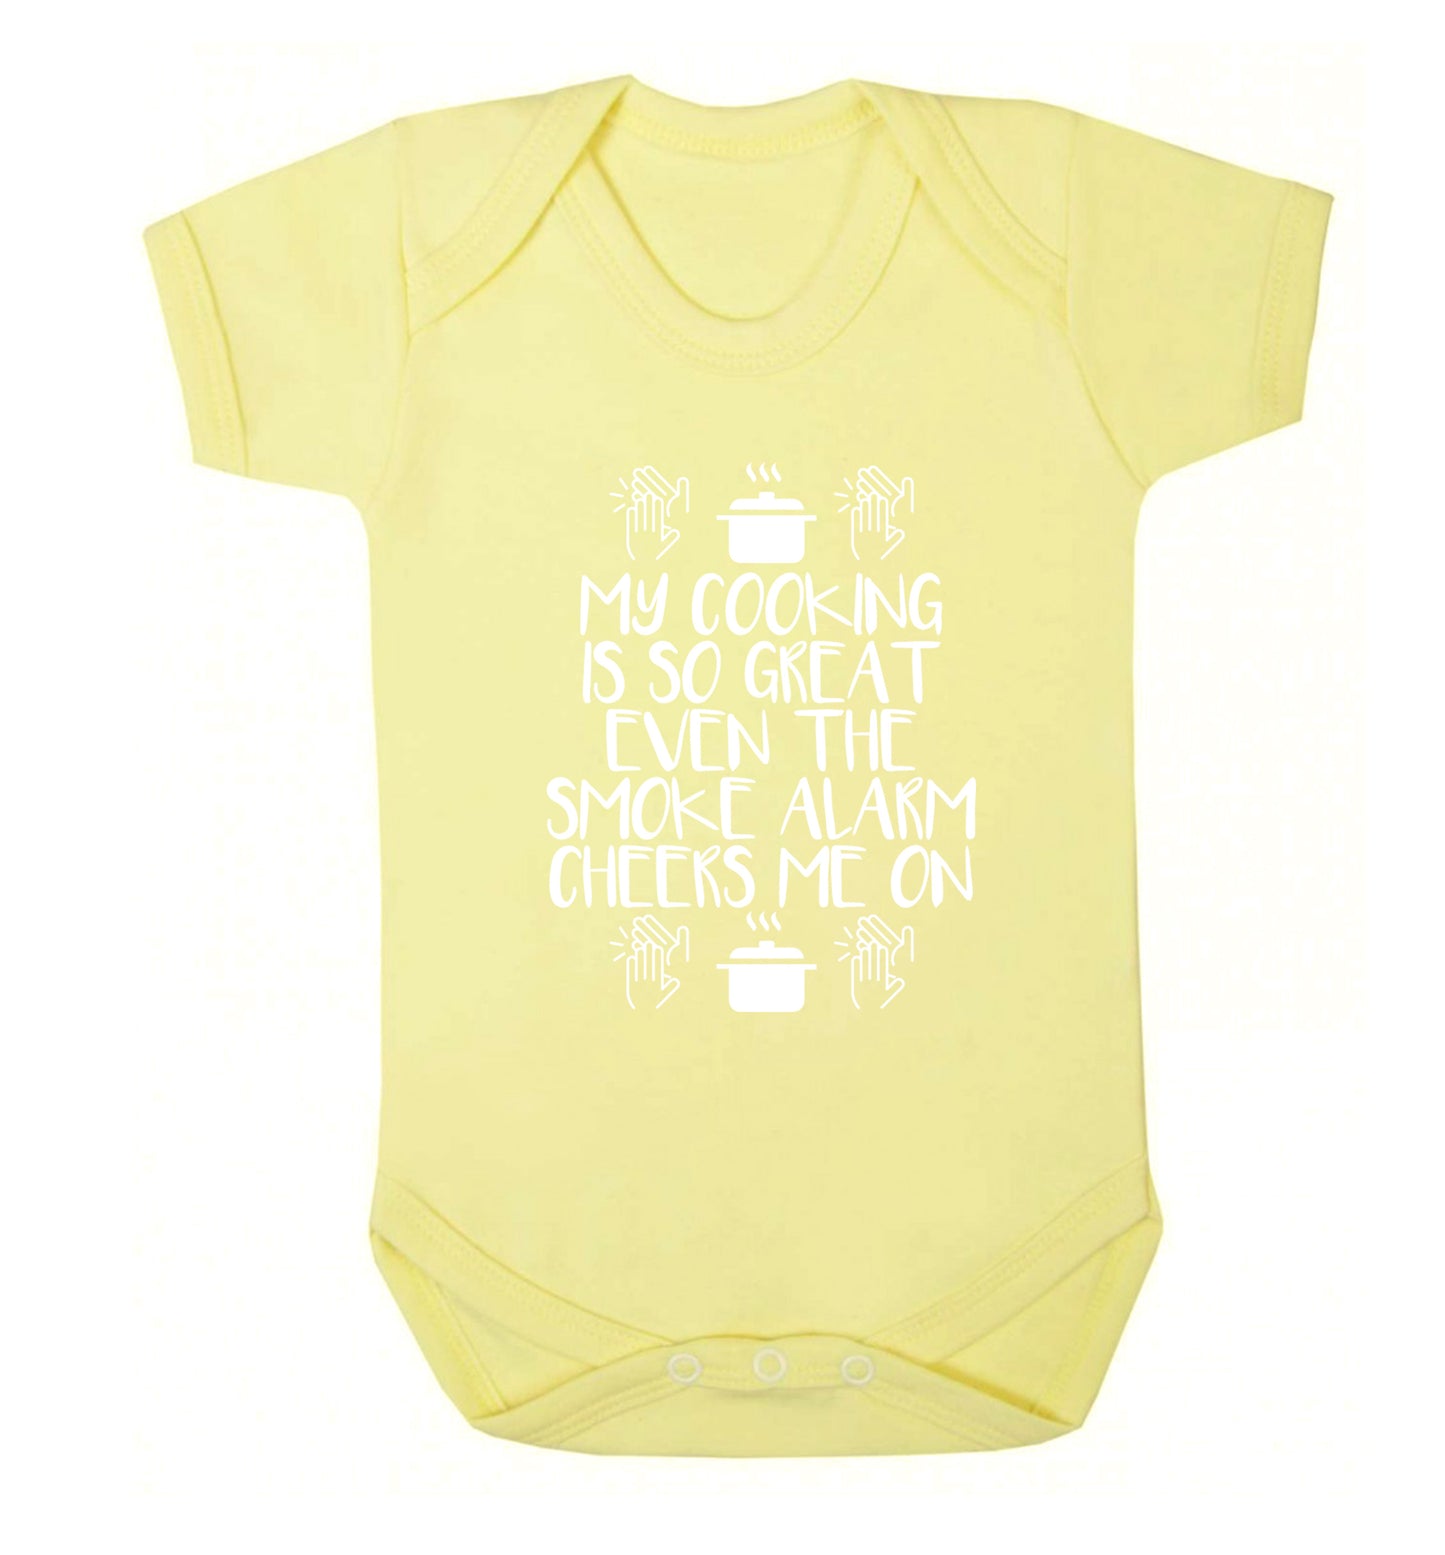 My cooking is so great even the smoke alarm cheers me on! Baby Vest pale yellow 18-24 months